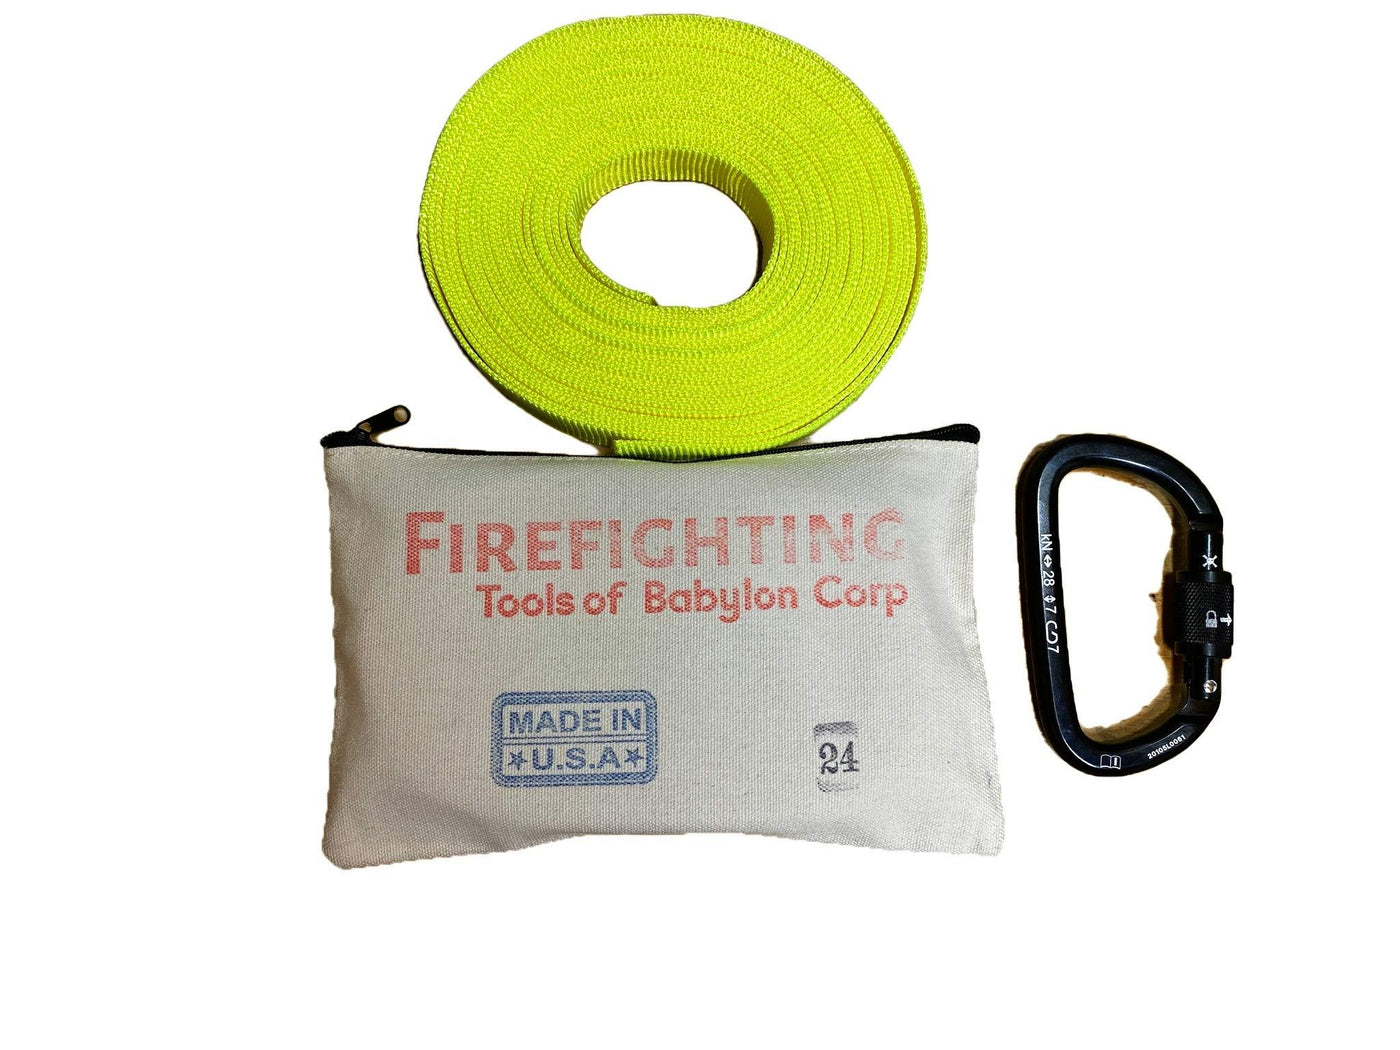 Firefighter Rescue Webbing and Carabiner Kit - Made in USA